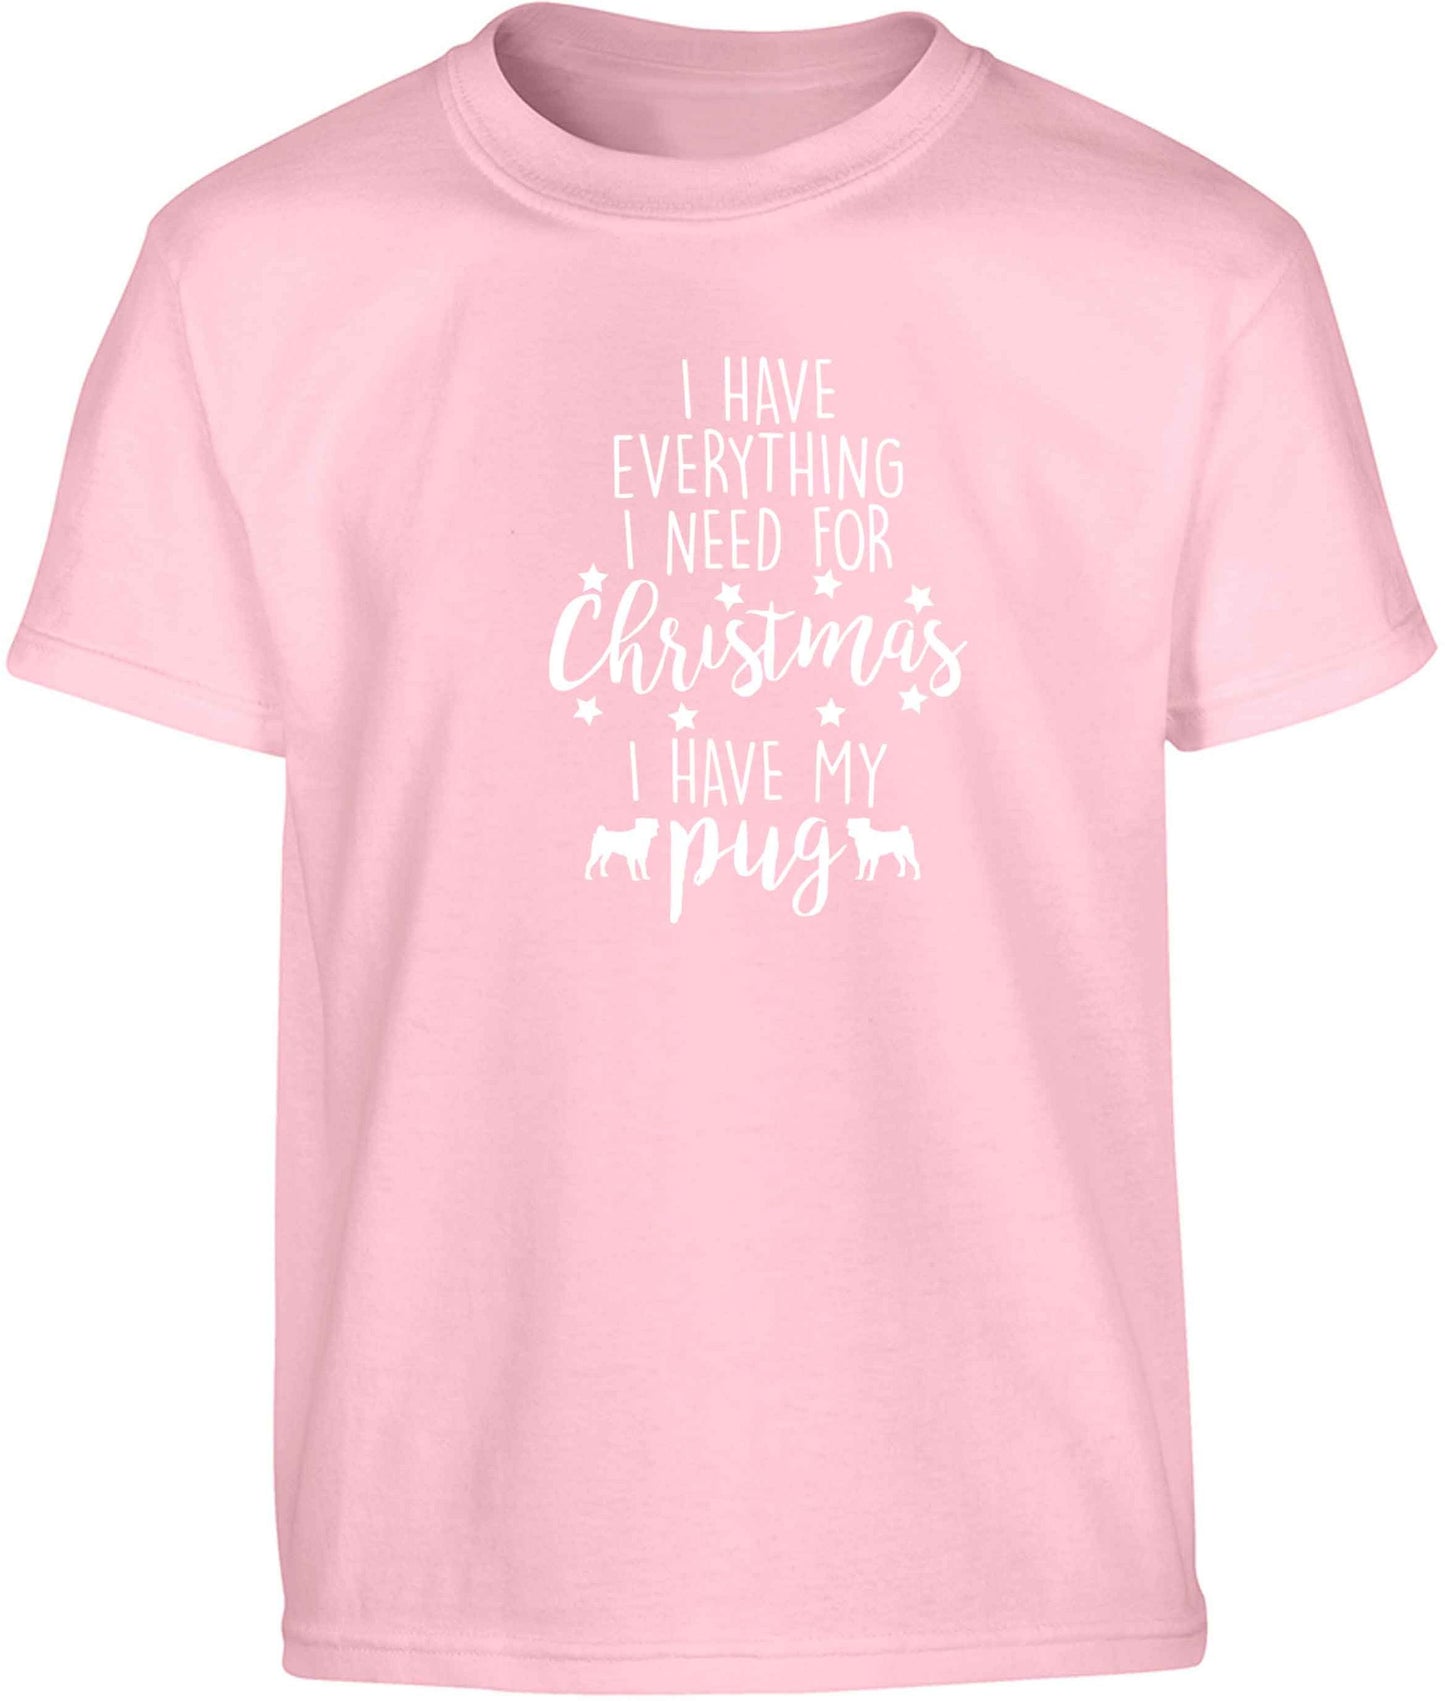 I have everything I need for Christmas I have my pug Children's light pink Tshirt 12-13 Years